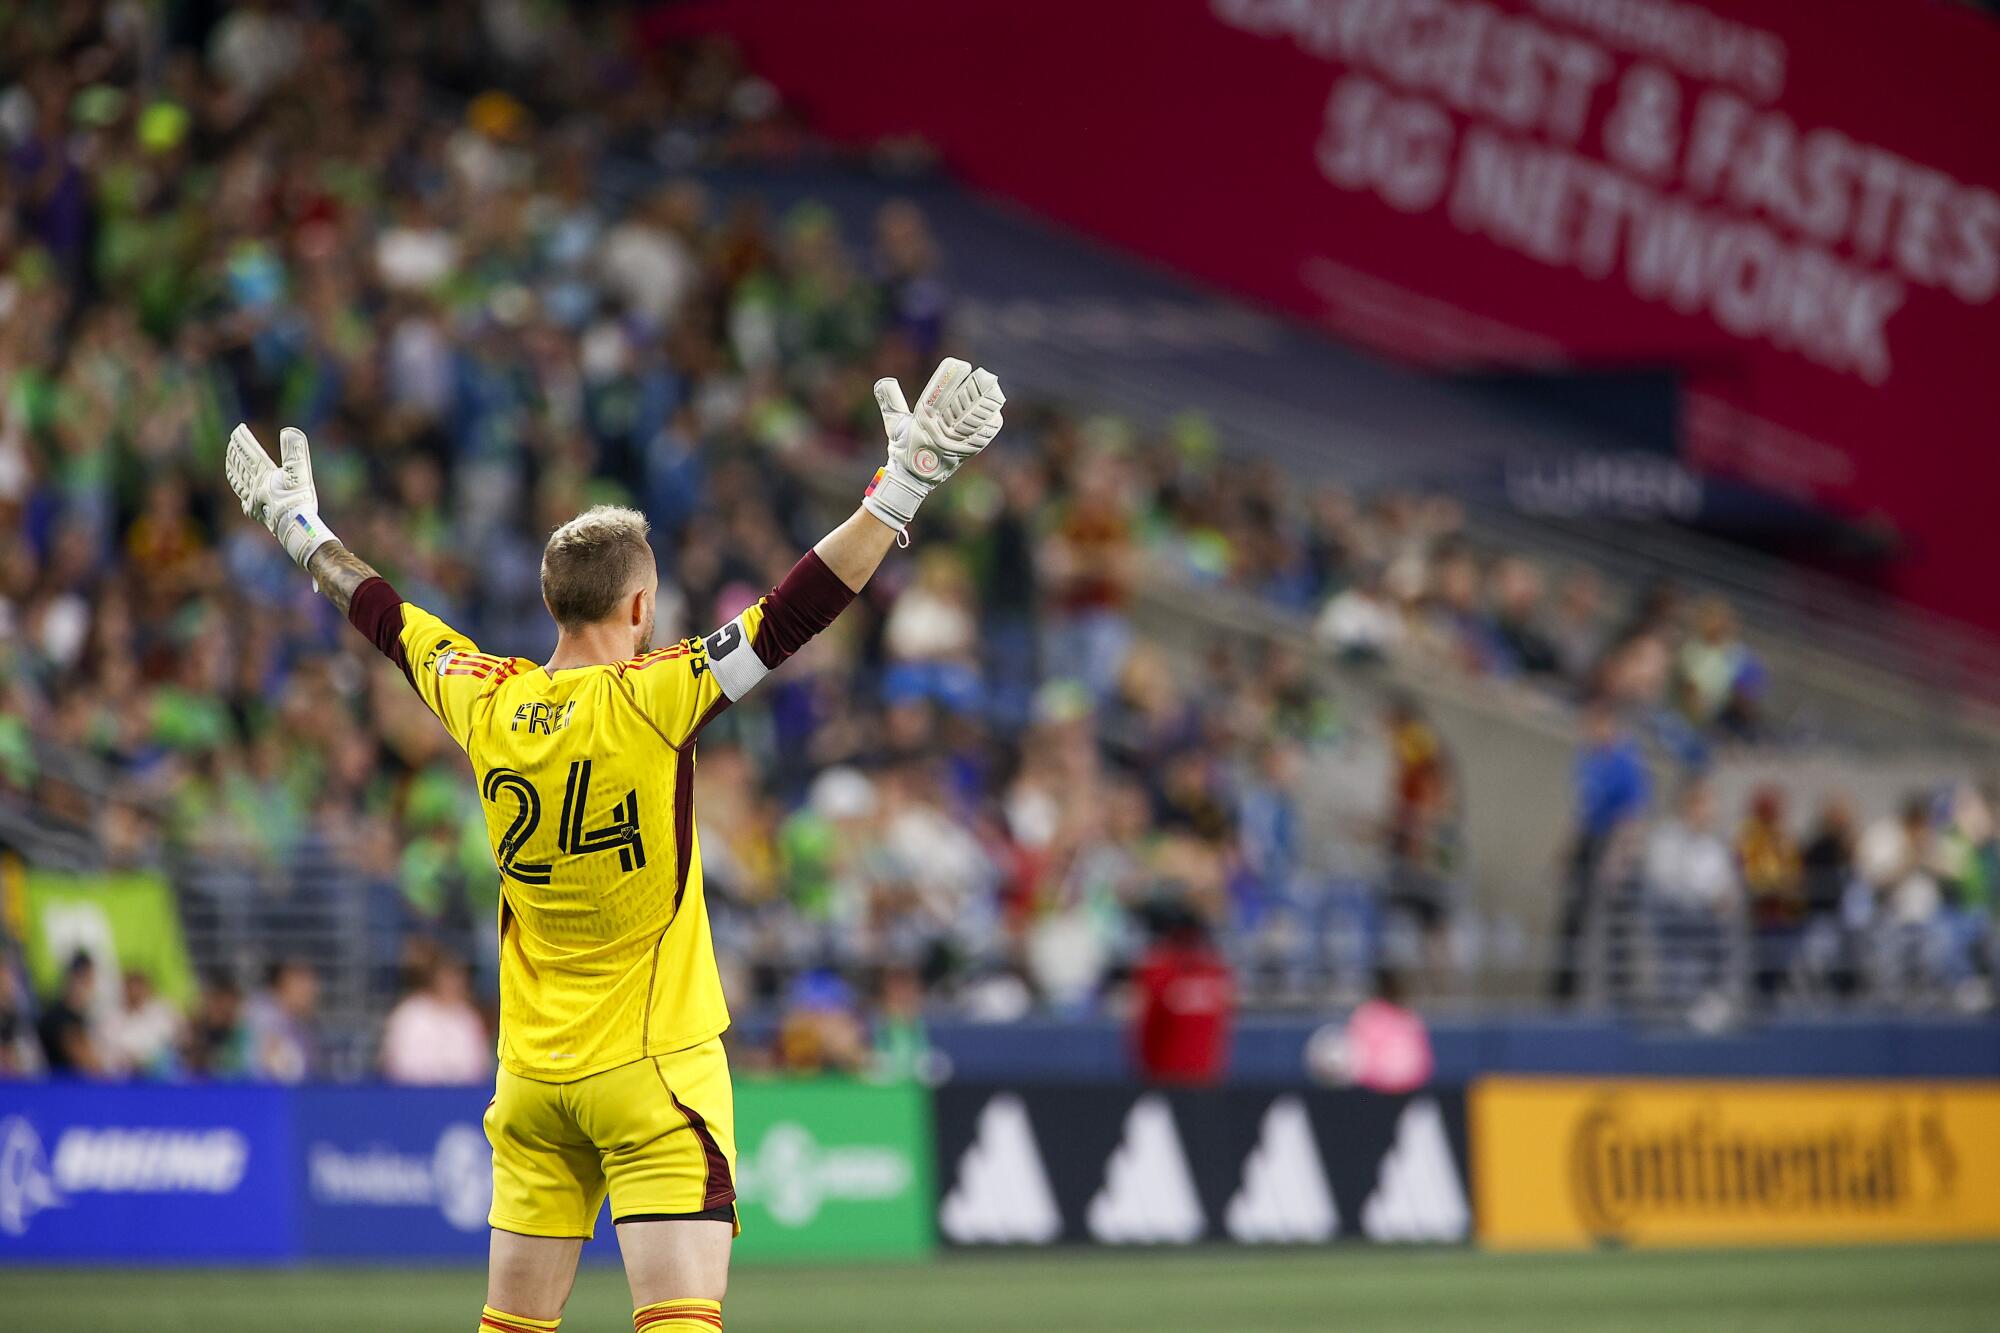 Sounders goalkeeper Stefan Frei holds his arms aloft in protest of a call on the field.